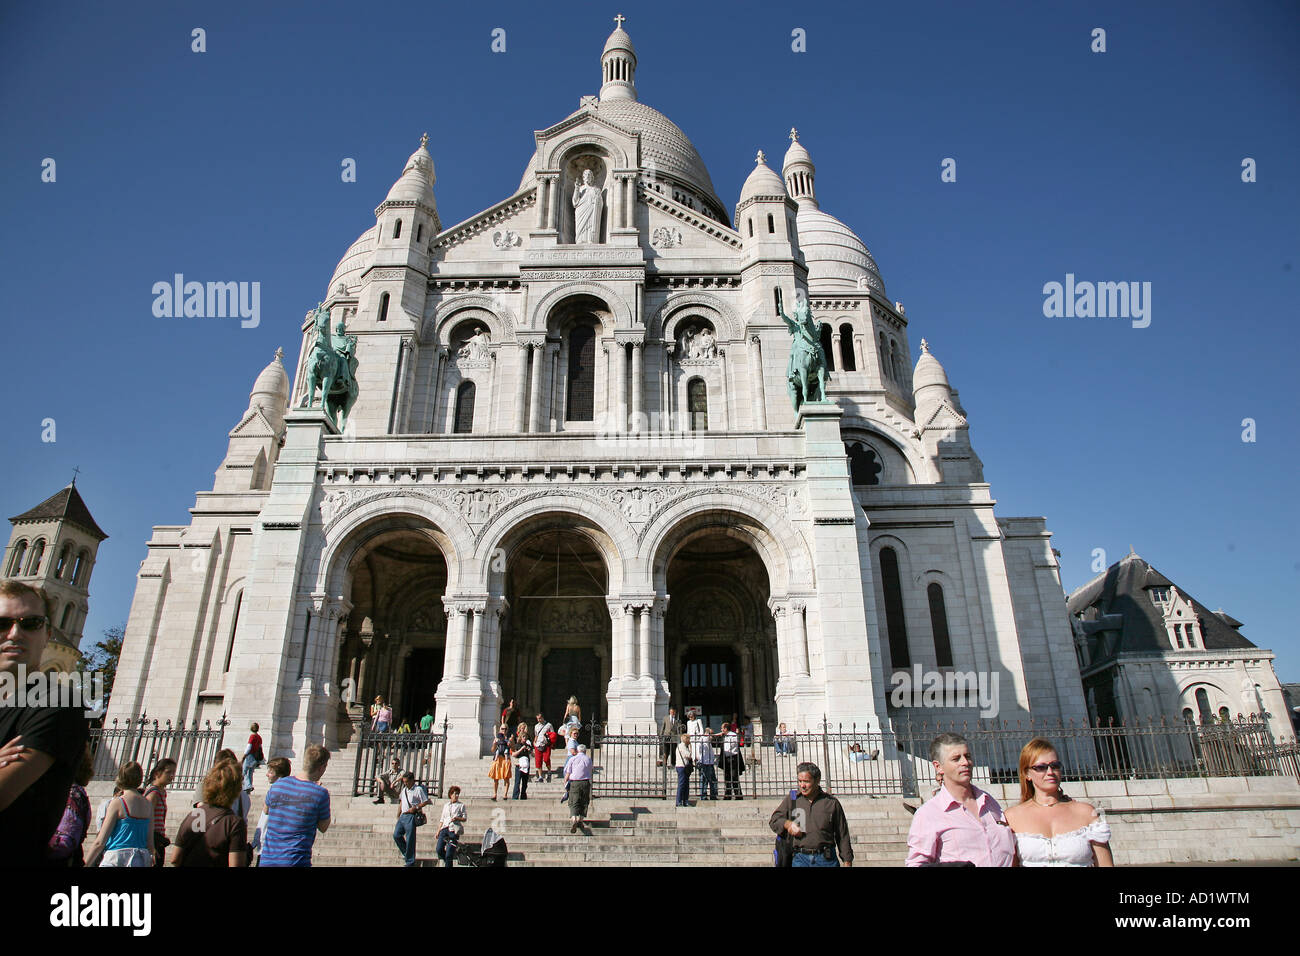 The Sacre Coeur in Paris France Stock Photo